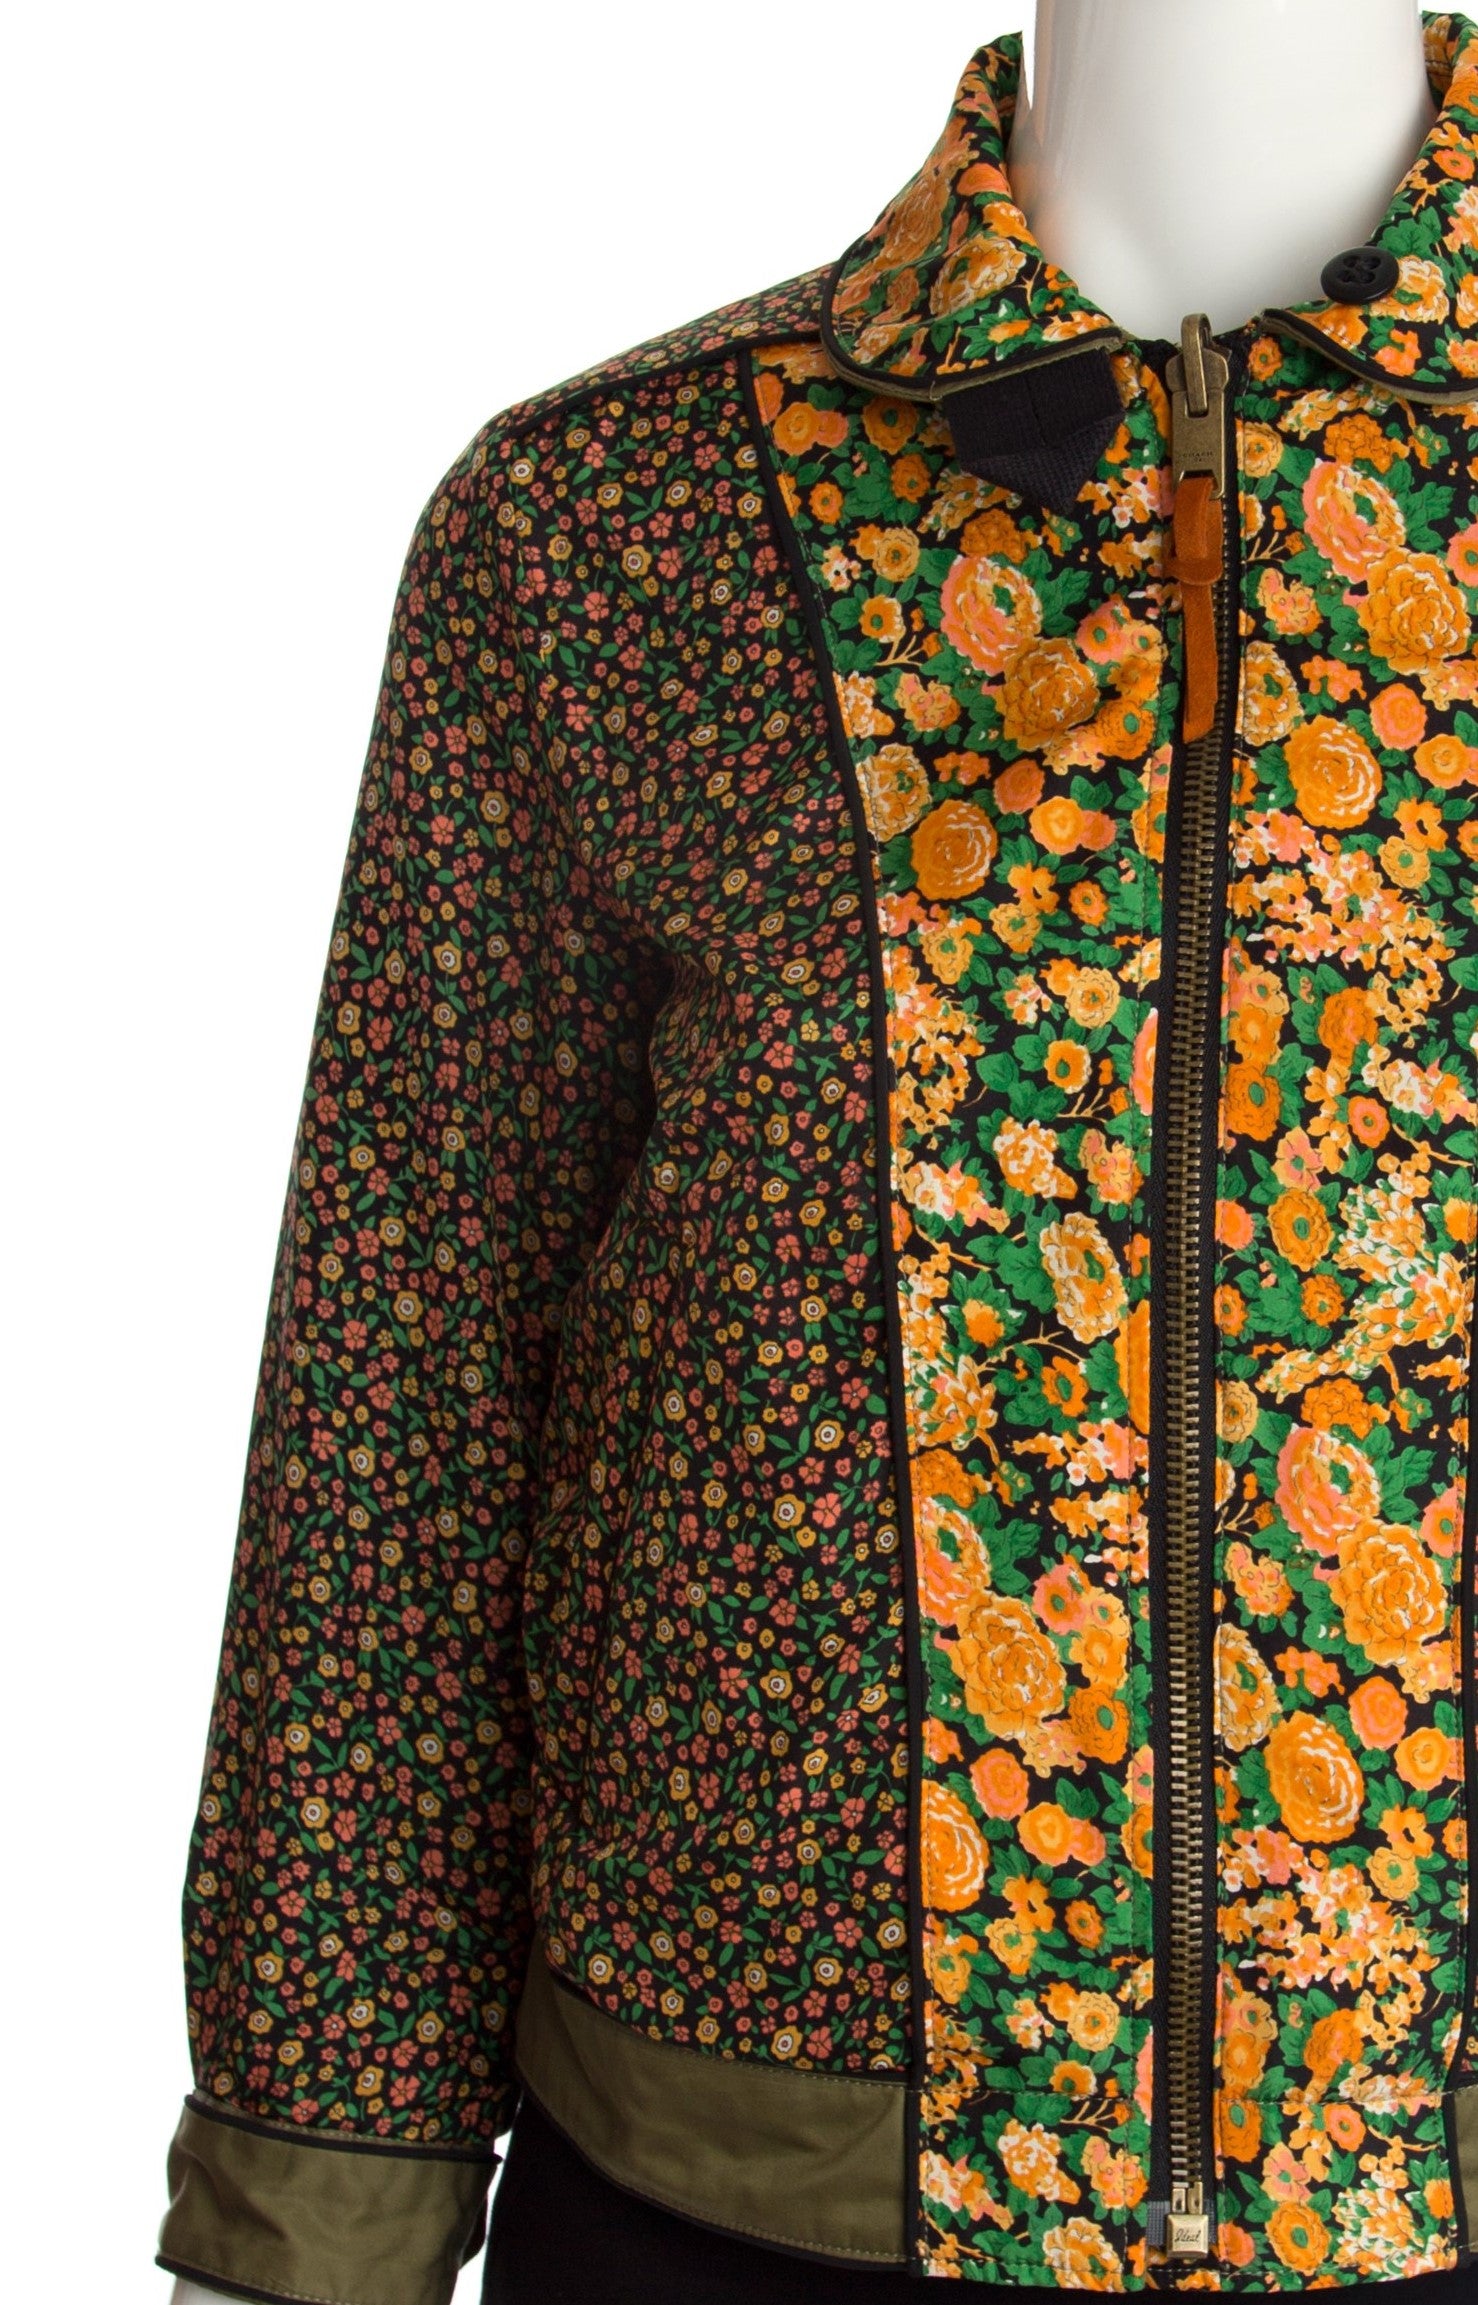 Coach - Reversible Solid or Floral Bomber Jacket